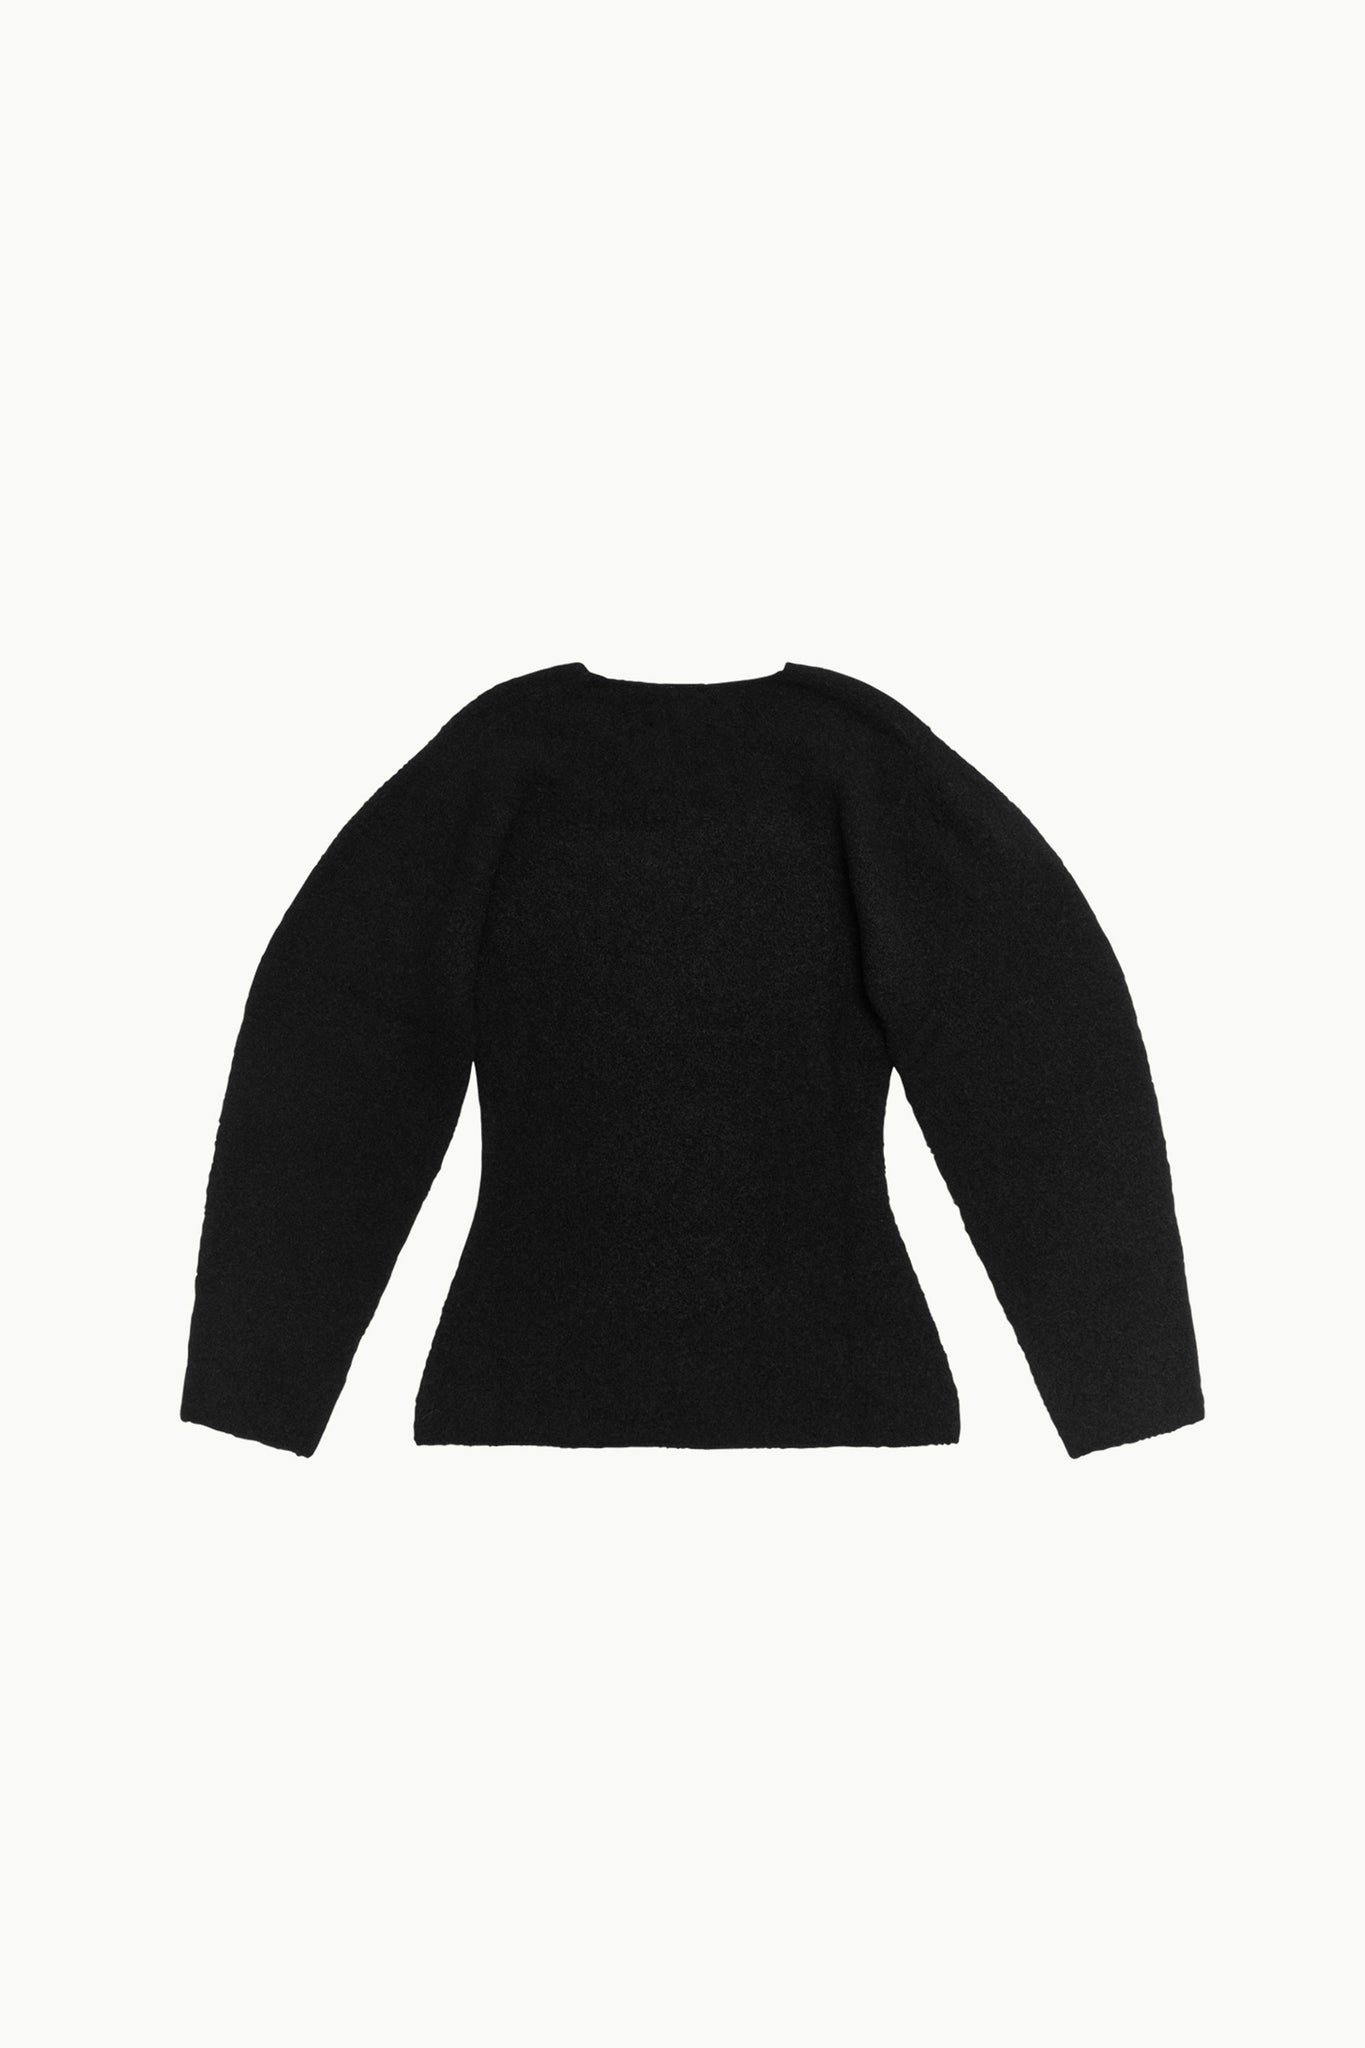 AMOMENTO HOURGLASS WHOLE GARMENT KNIT TOP [EXCLUSIVE]